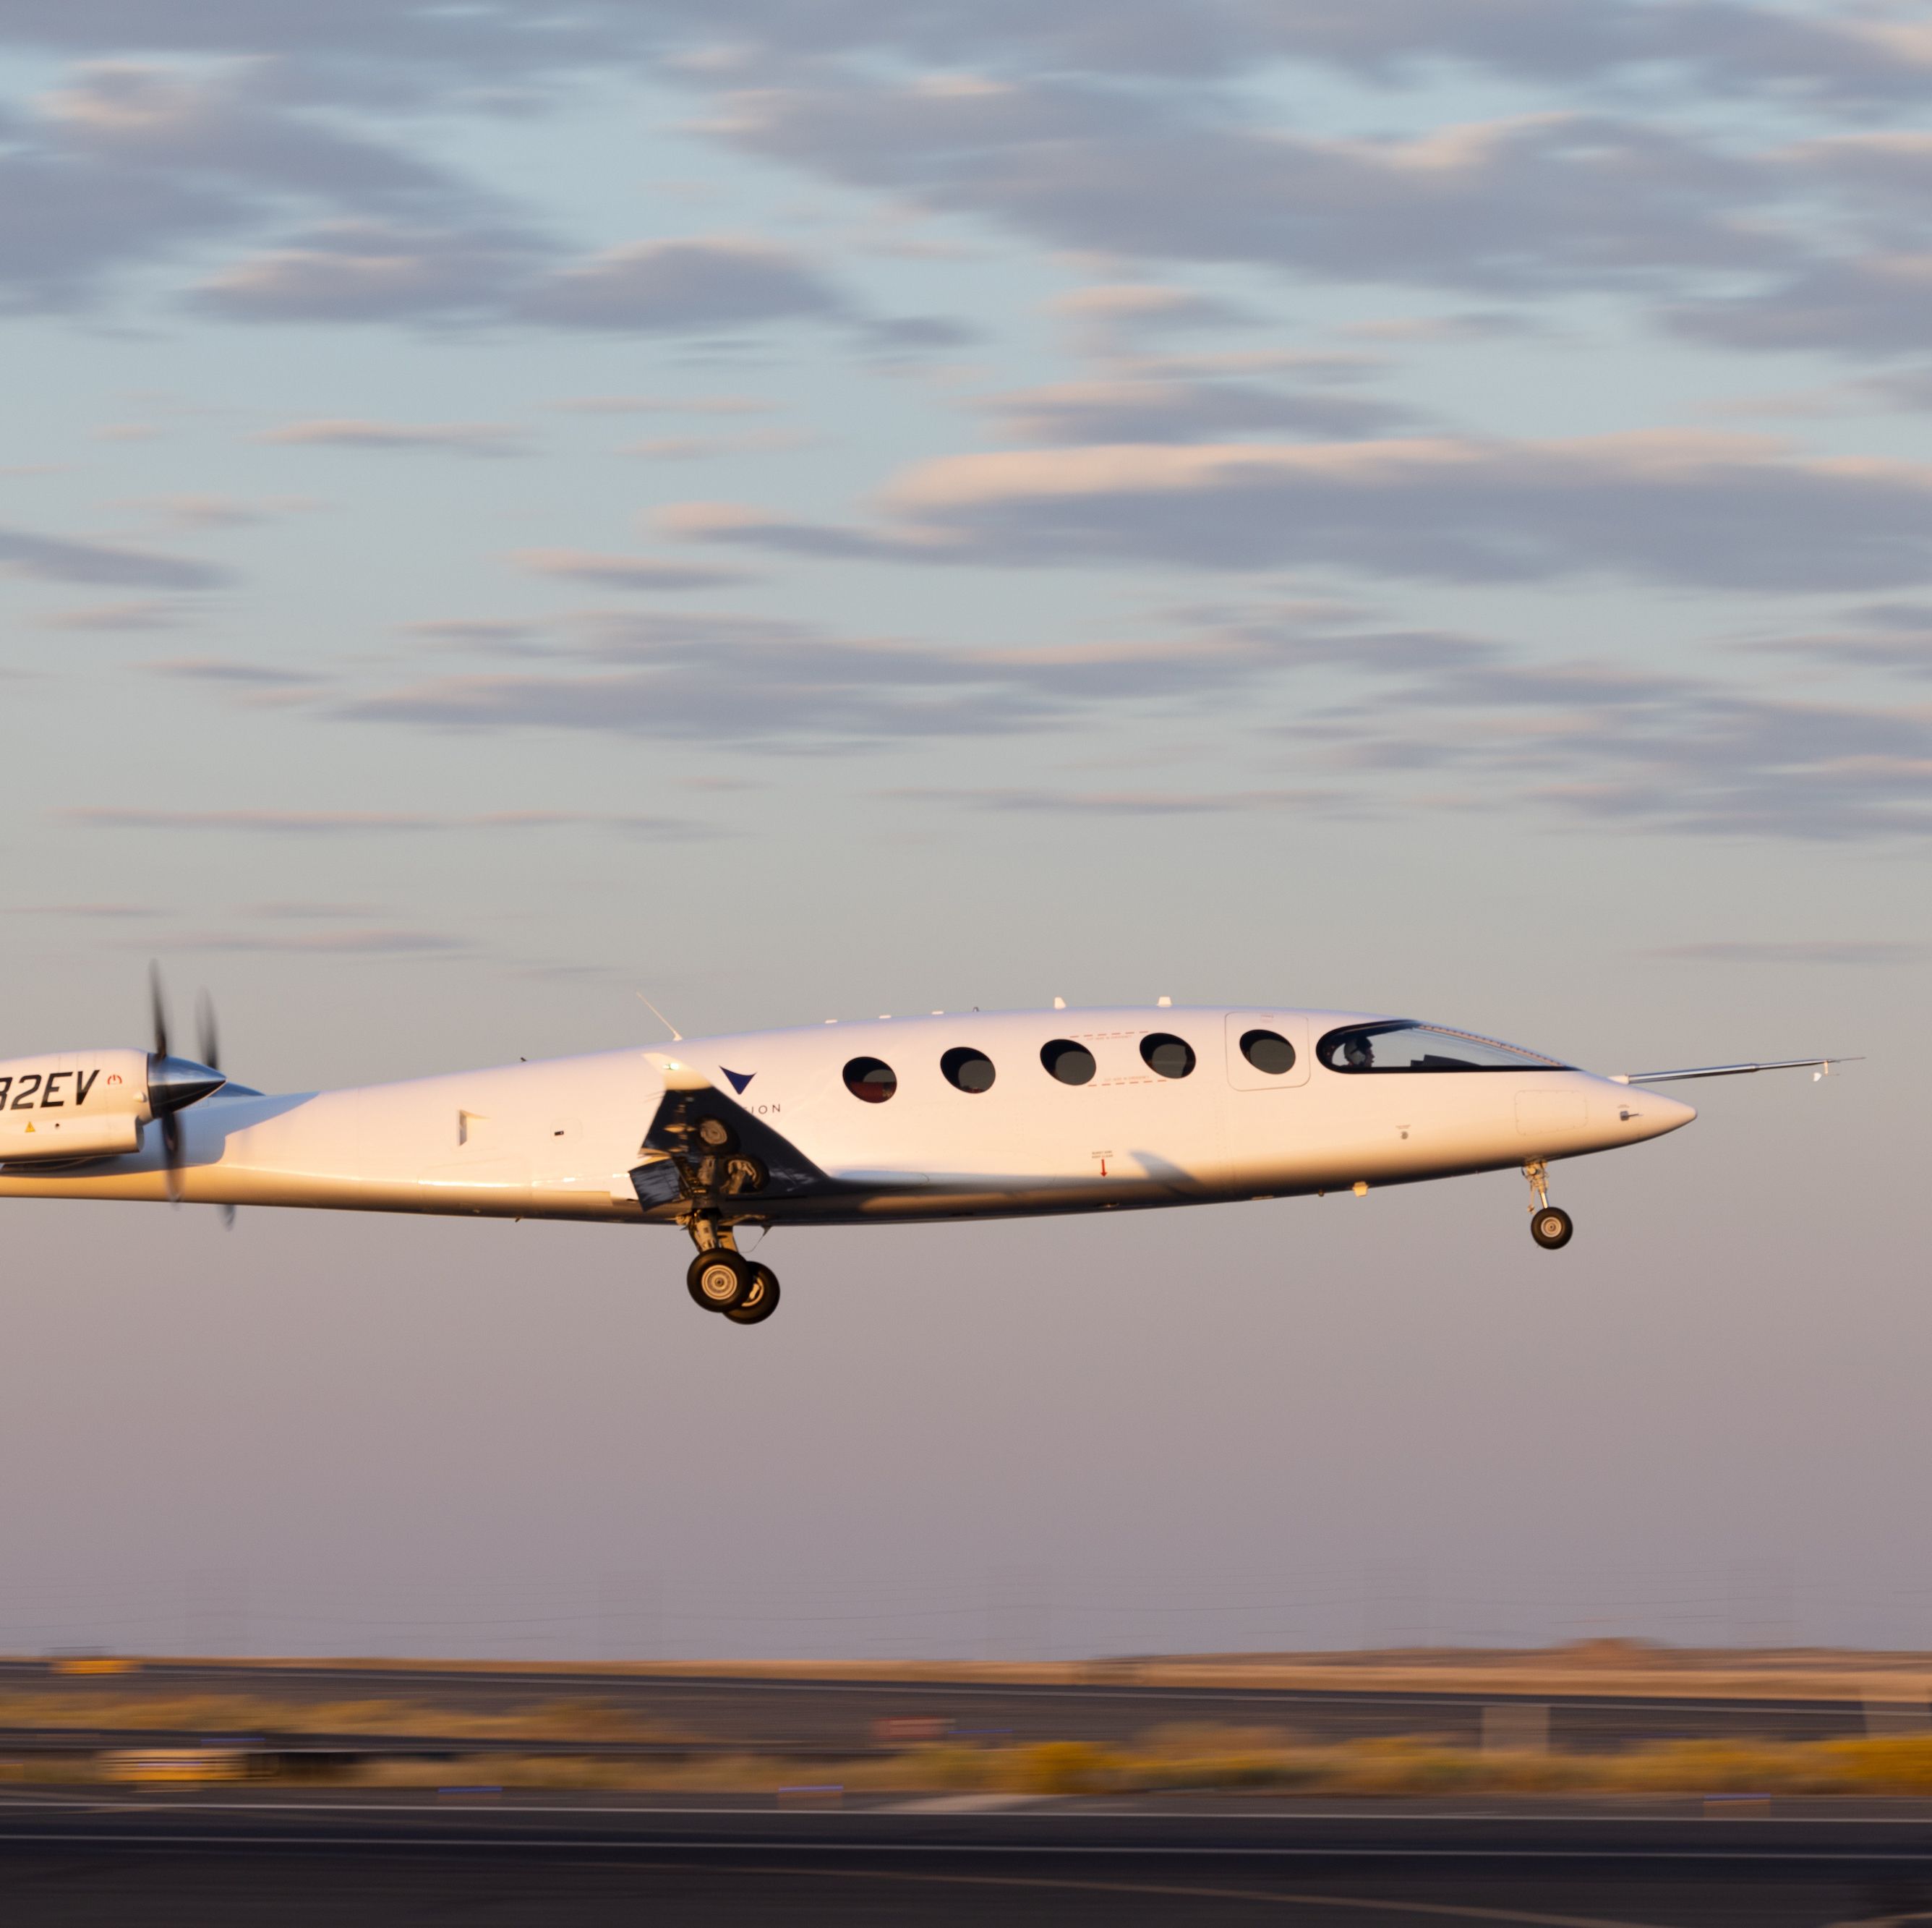 Alice, the World's First All-Electric Passenger Jet, Just Aced Her Maiden Flight